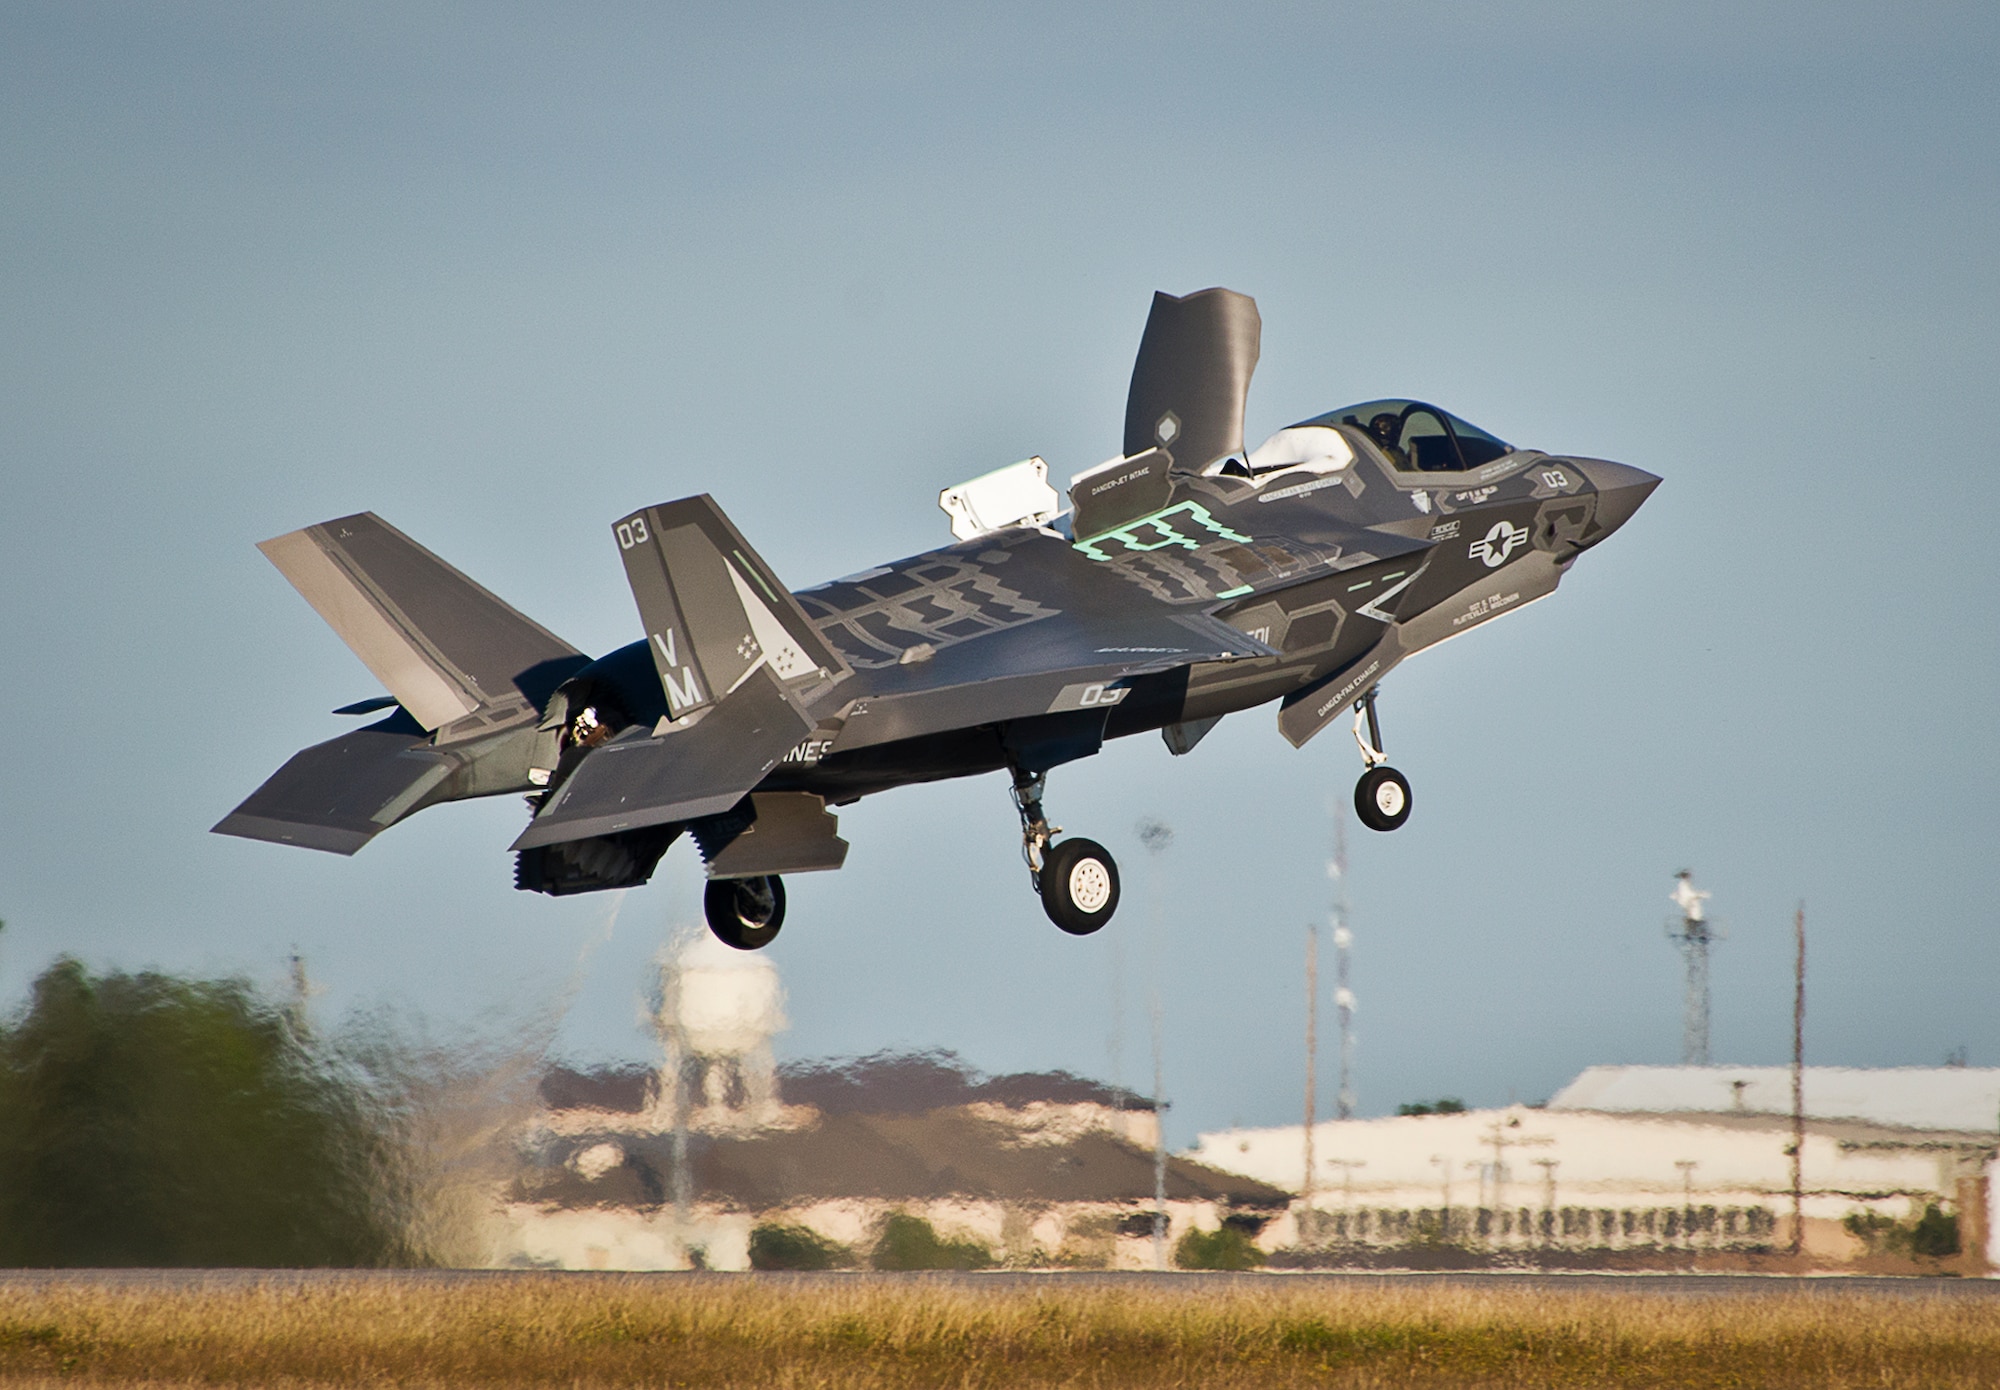 A Marine F-35B joint strike fighter lifts off from the runway during the first short take-off and vertical landing mission at Eglin Air Force Base, Fla., Oct. 25. The milestone training mission was flown by Maj. Brendan M. Walsh, of the Marine Fighter Attack Training Squadron-501.  Walsh recently qualified in vertical landing operations at Marine Corps Air Station Yuma, Ariz. in preparation for this mission.  (U.S. Air Force photo/Samuel King Jr.)